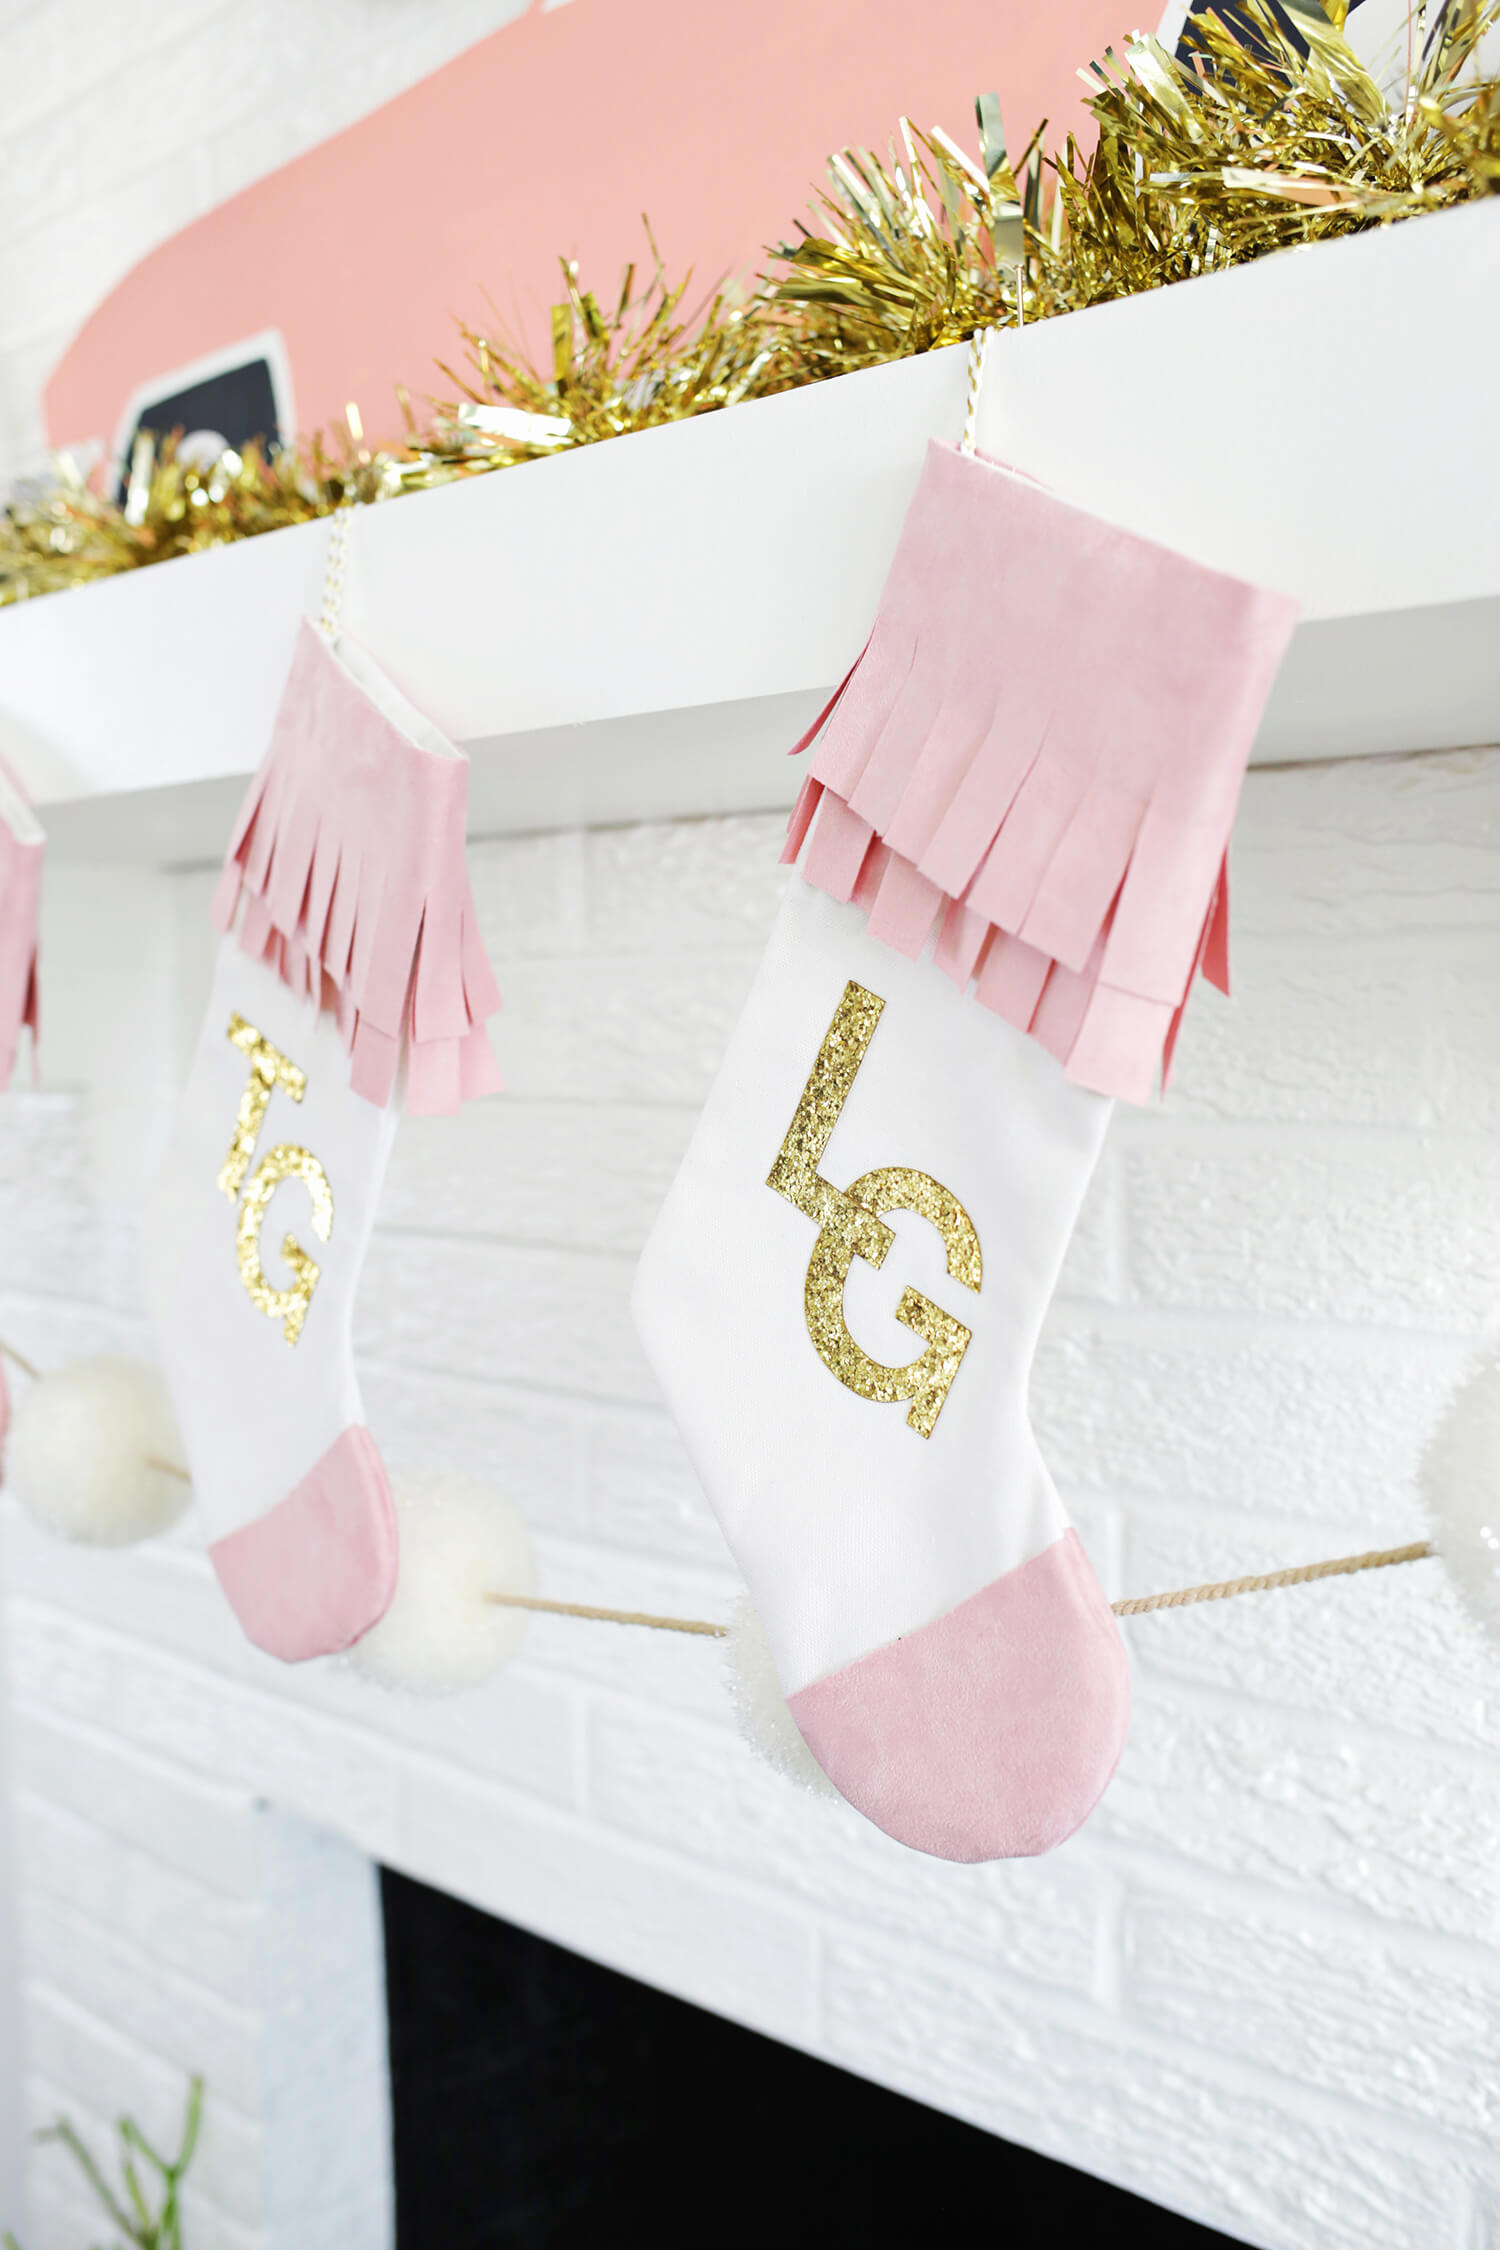 DIY glam Christmas stockings in white and pink, with gold glitter